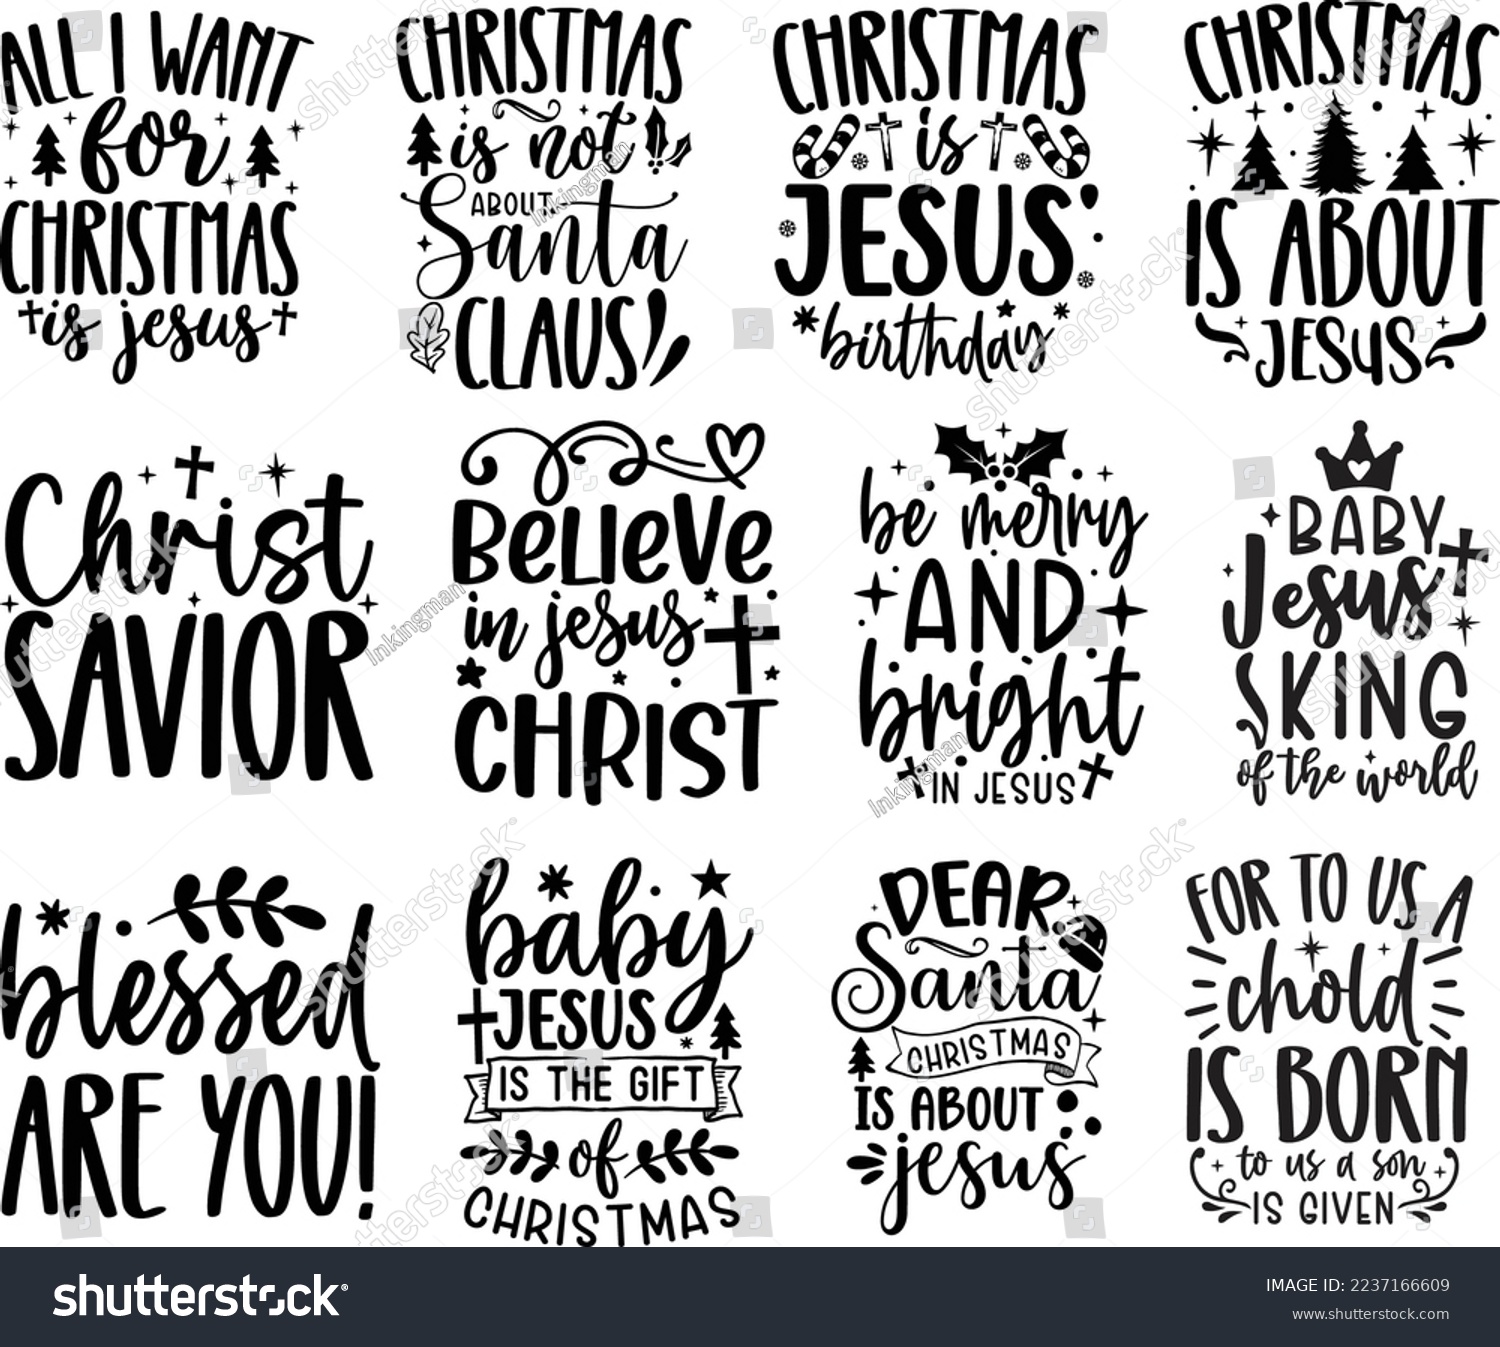 SVG of Christmas with Jesus Christ, Christmas Quote Vector, svg bundle, Jesus is King png, Merry Christmas, Happy New Year Quote, Good News, Song of God, Joy to the World, Savior of the World svg